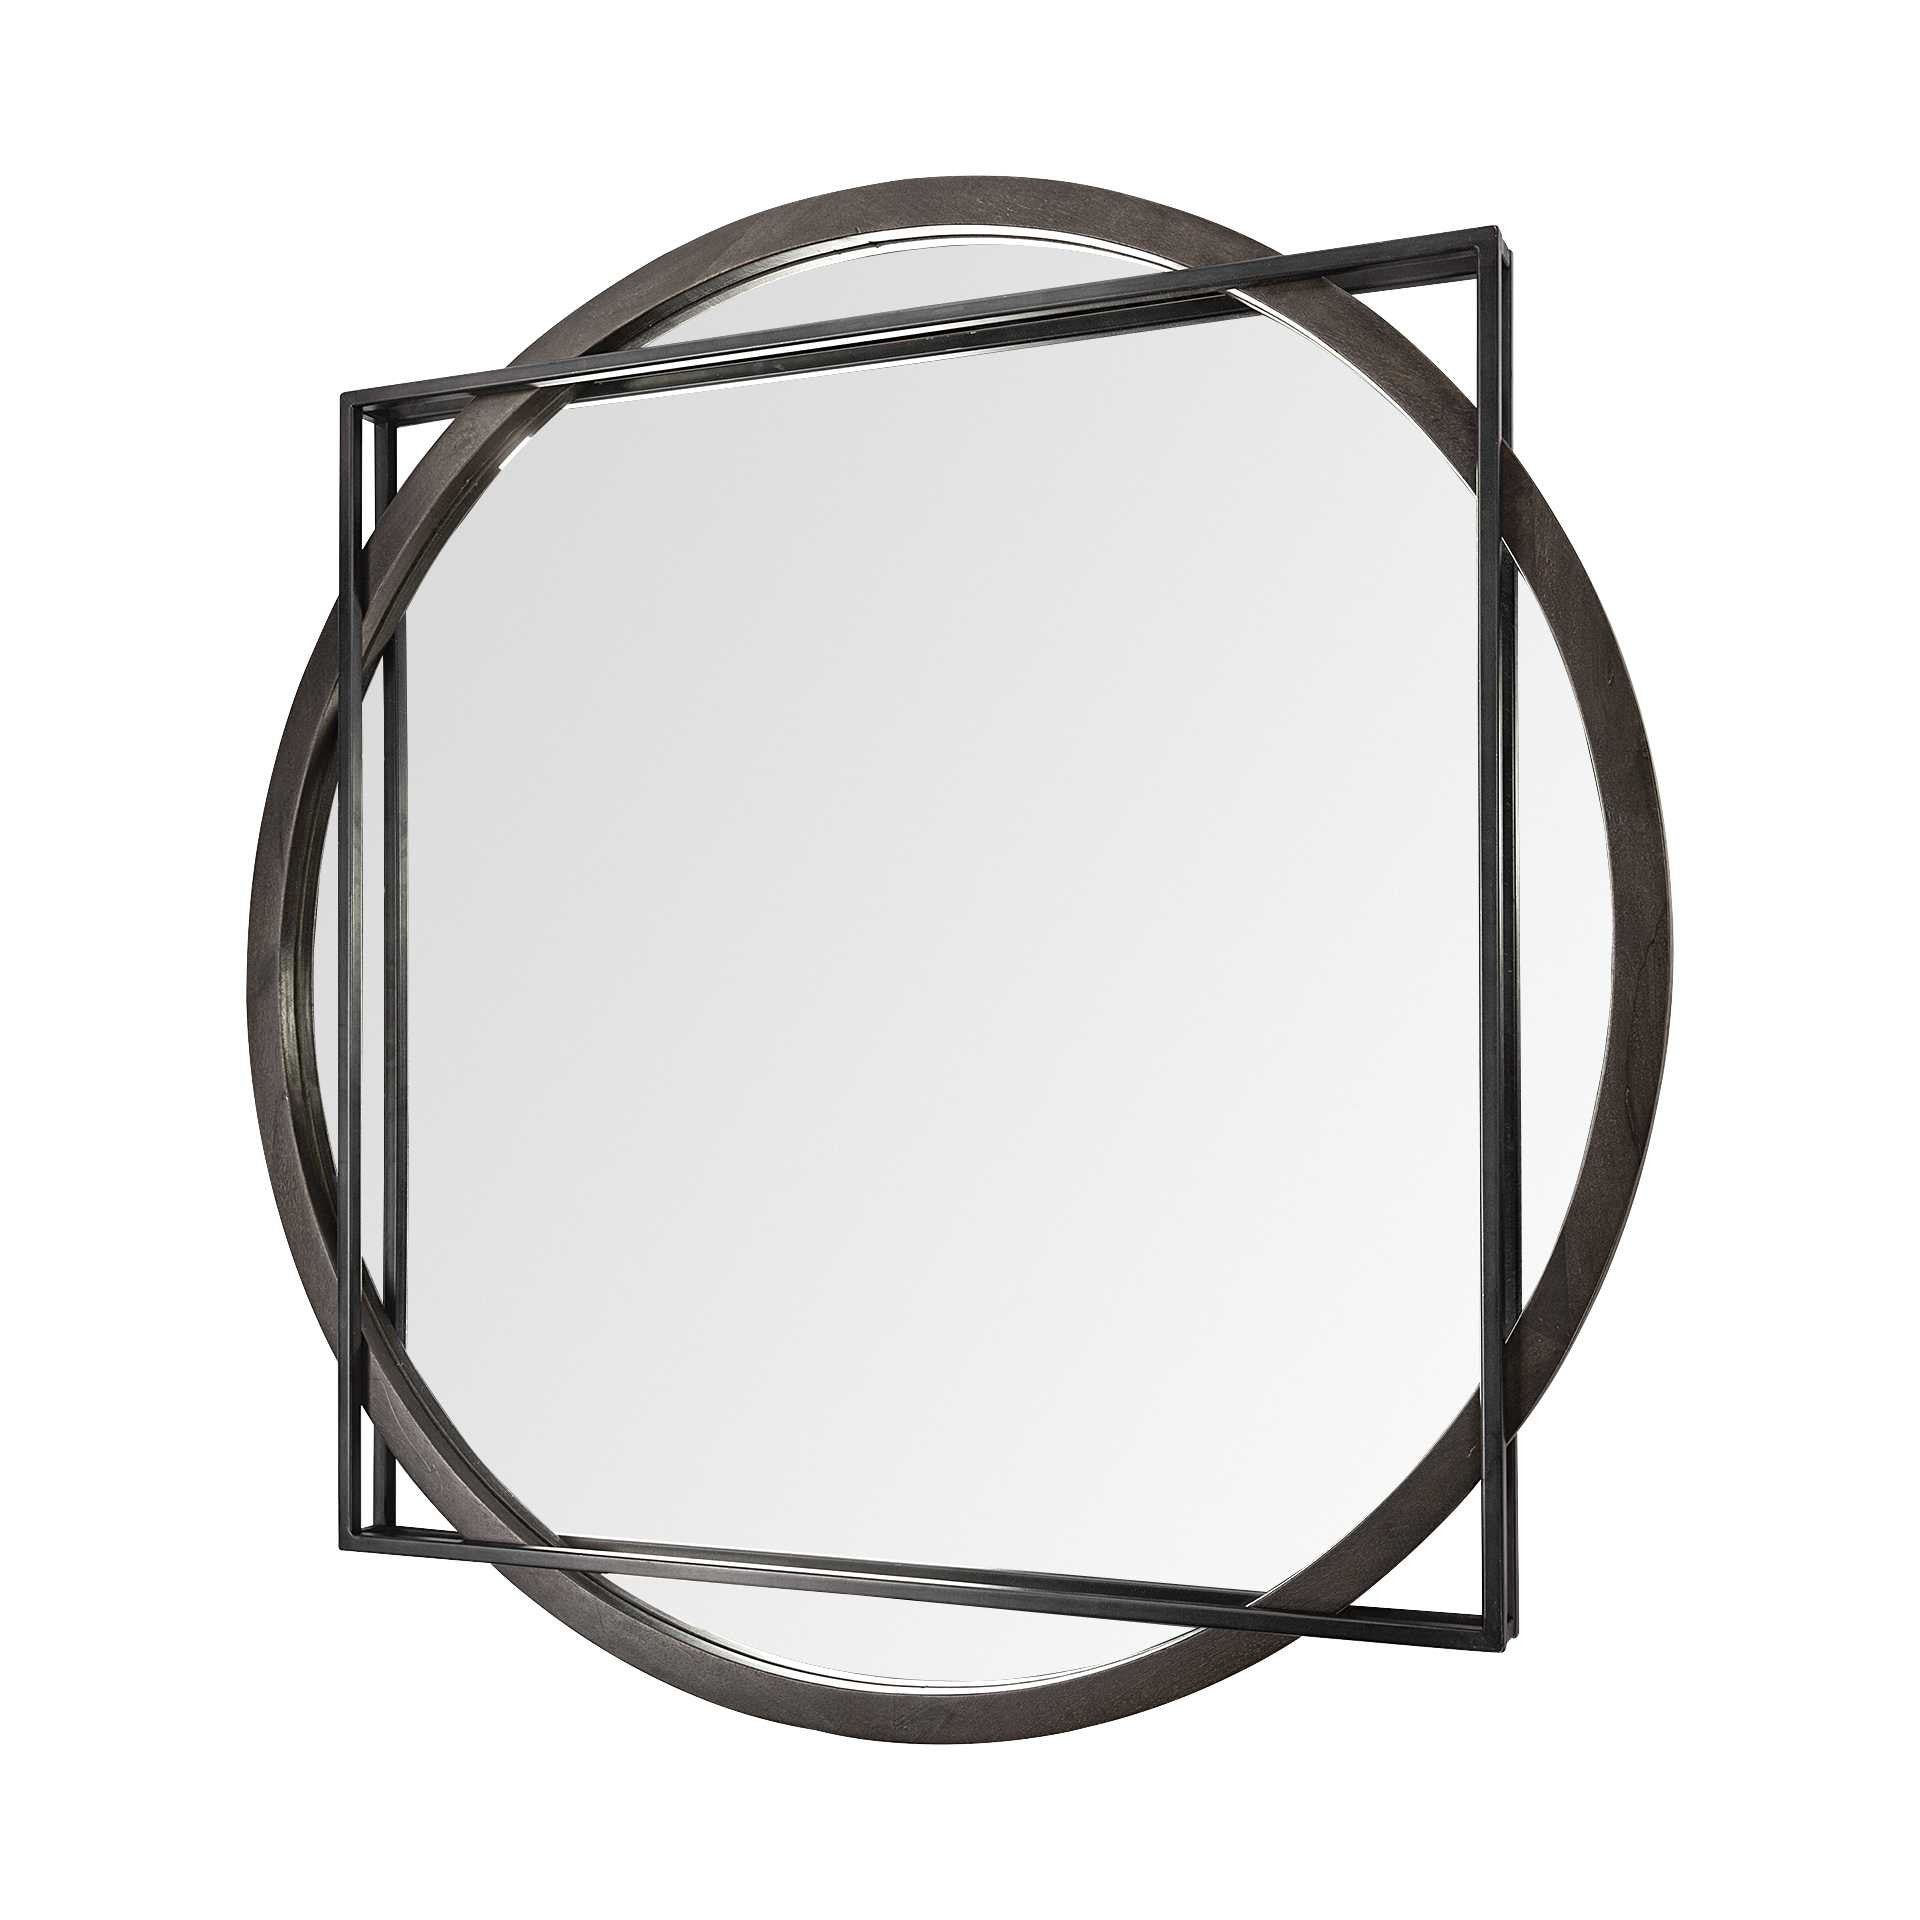 46" Round on Square Black Wood And Metal Frame Wall Mirror